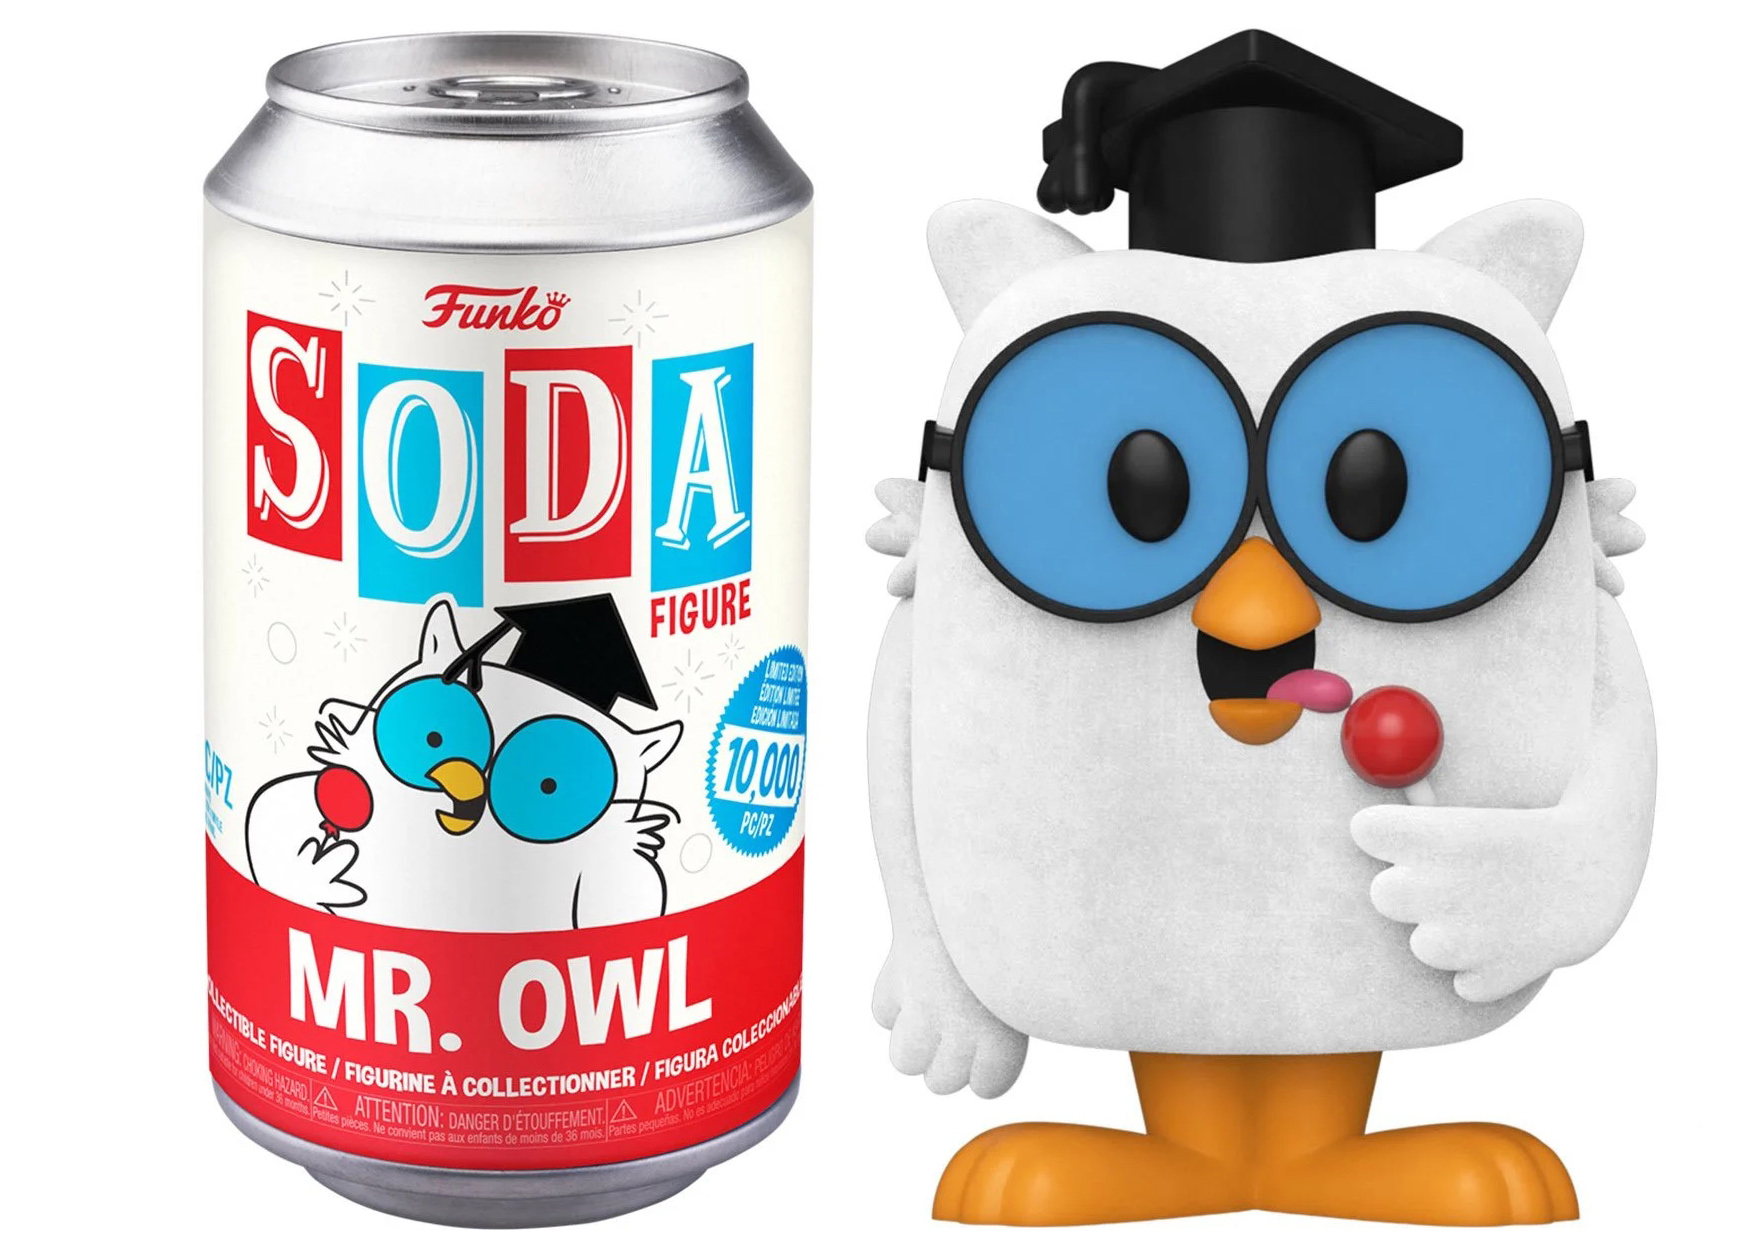 Funko Soda Tootsie Roll Mr. Owl Open Can Chase Figure - FW21 - US